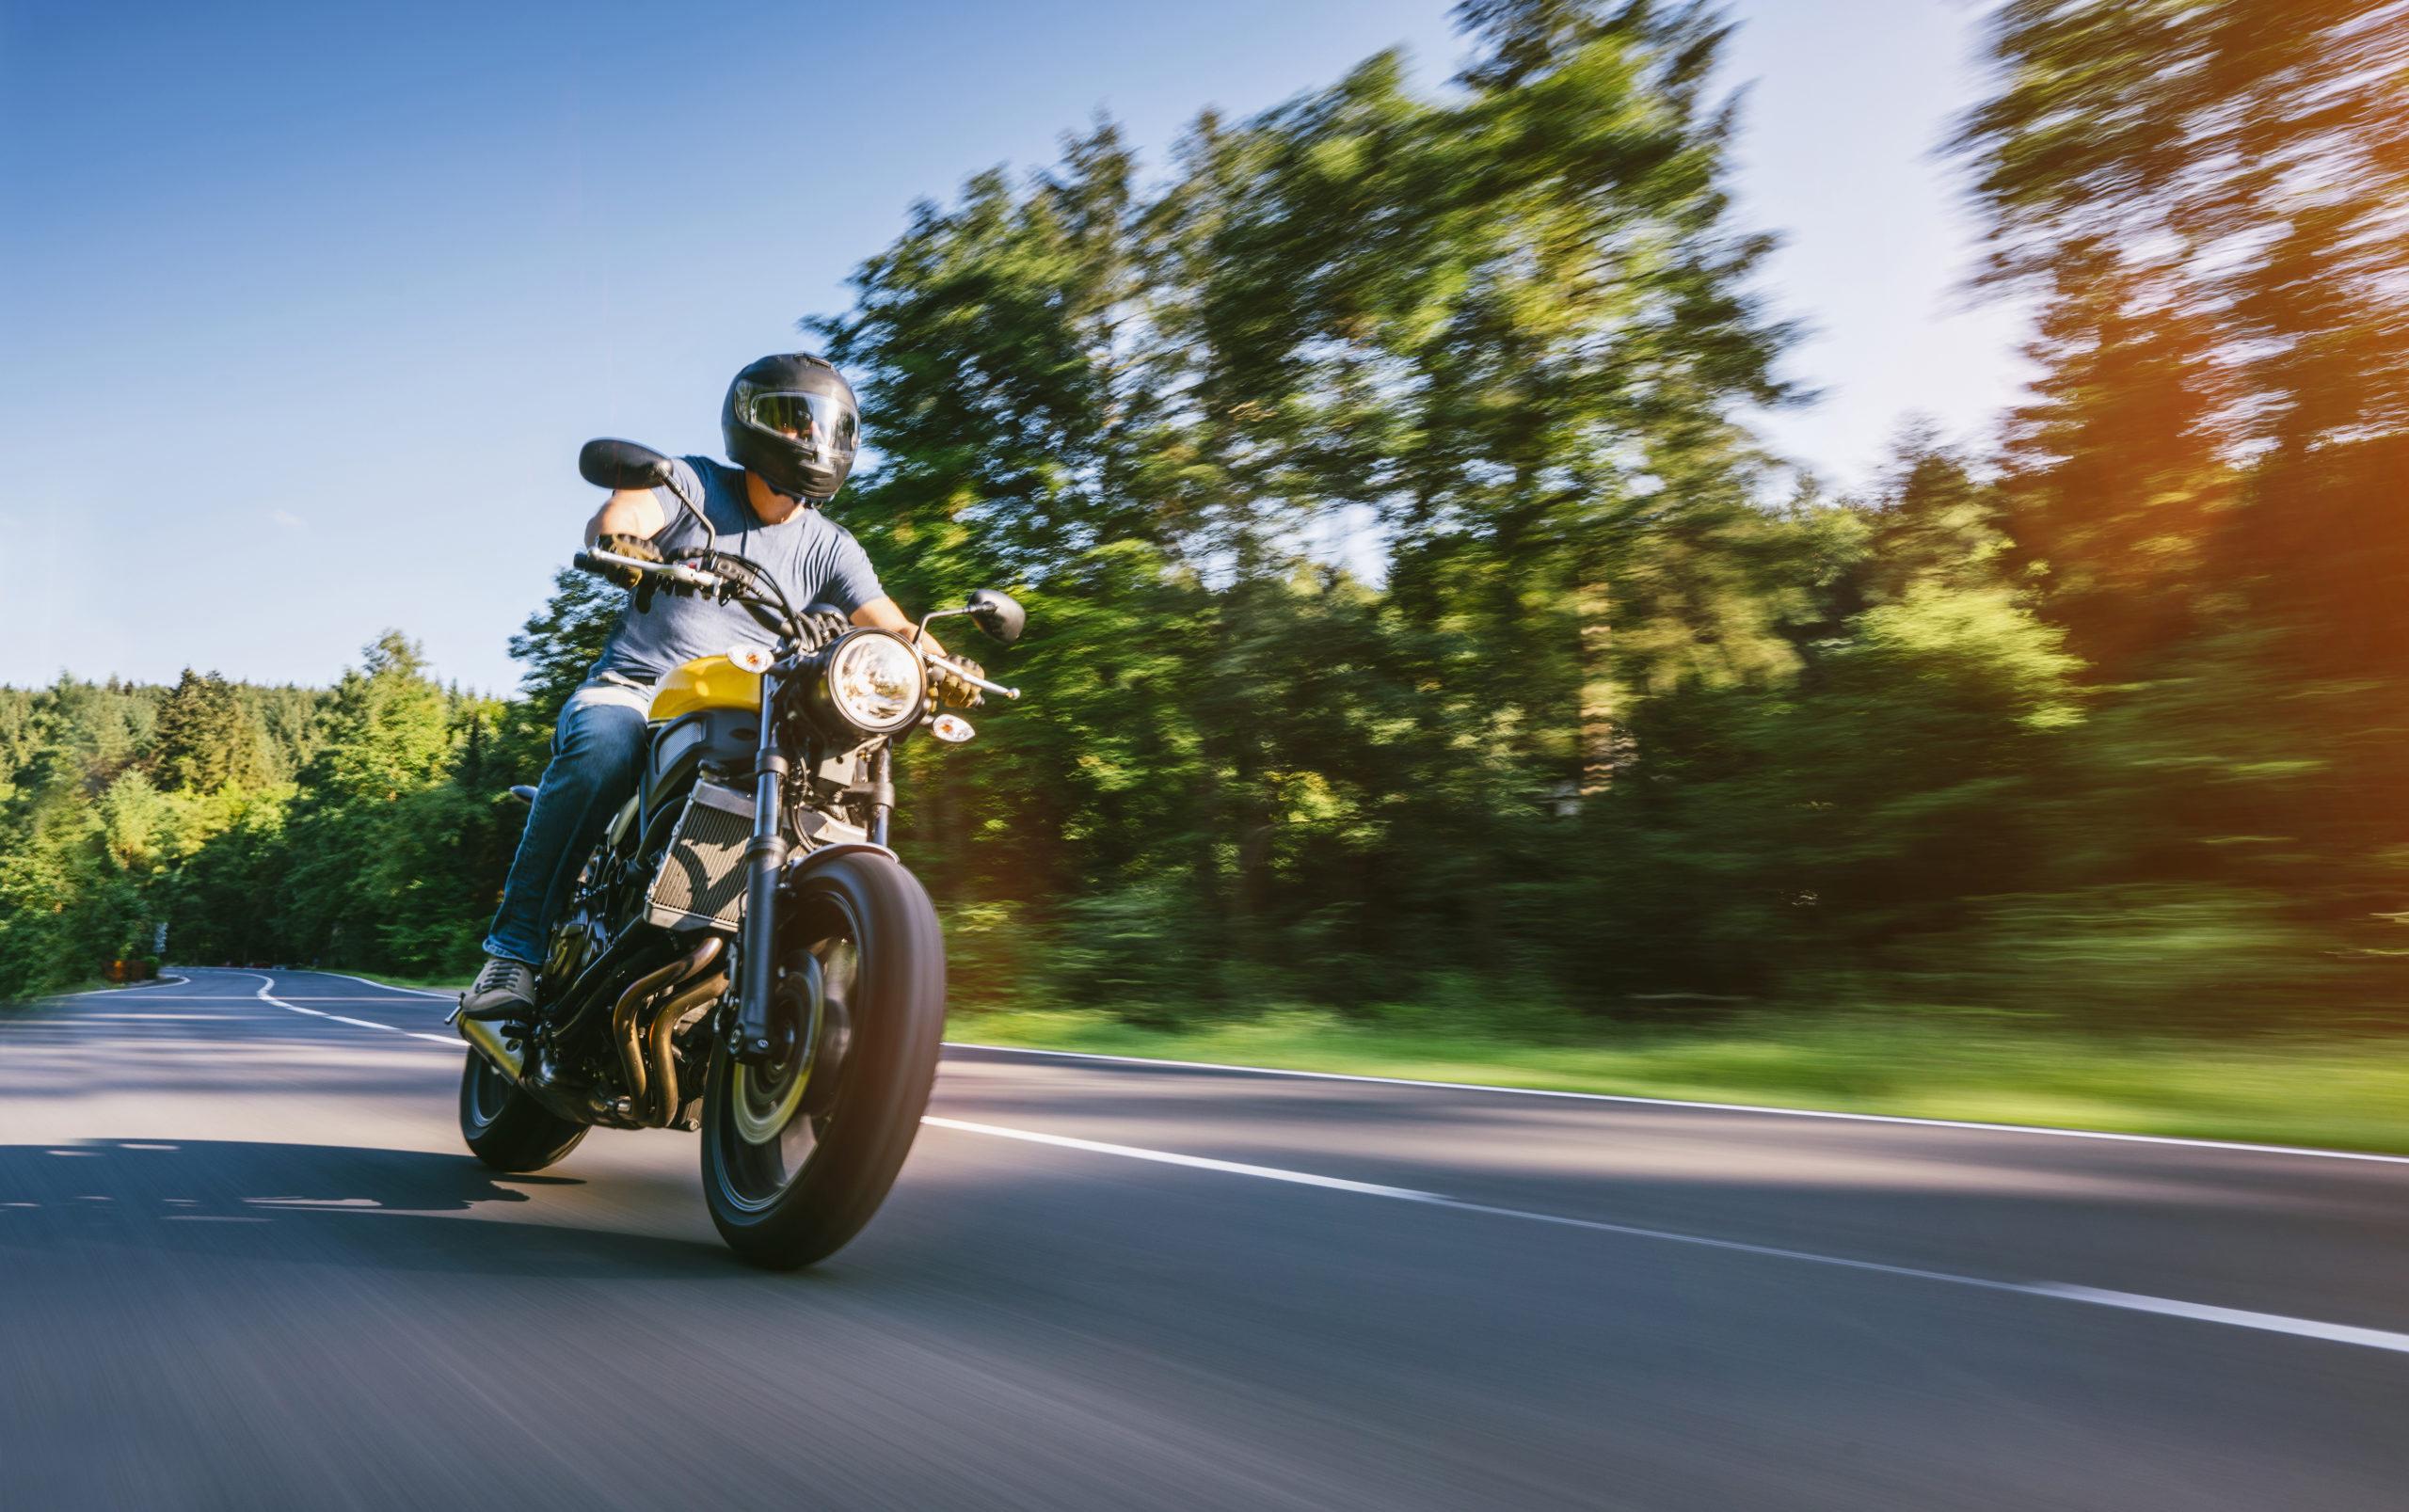 How to recover damages following motocycle accident